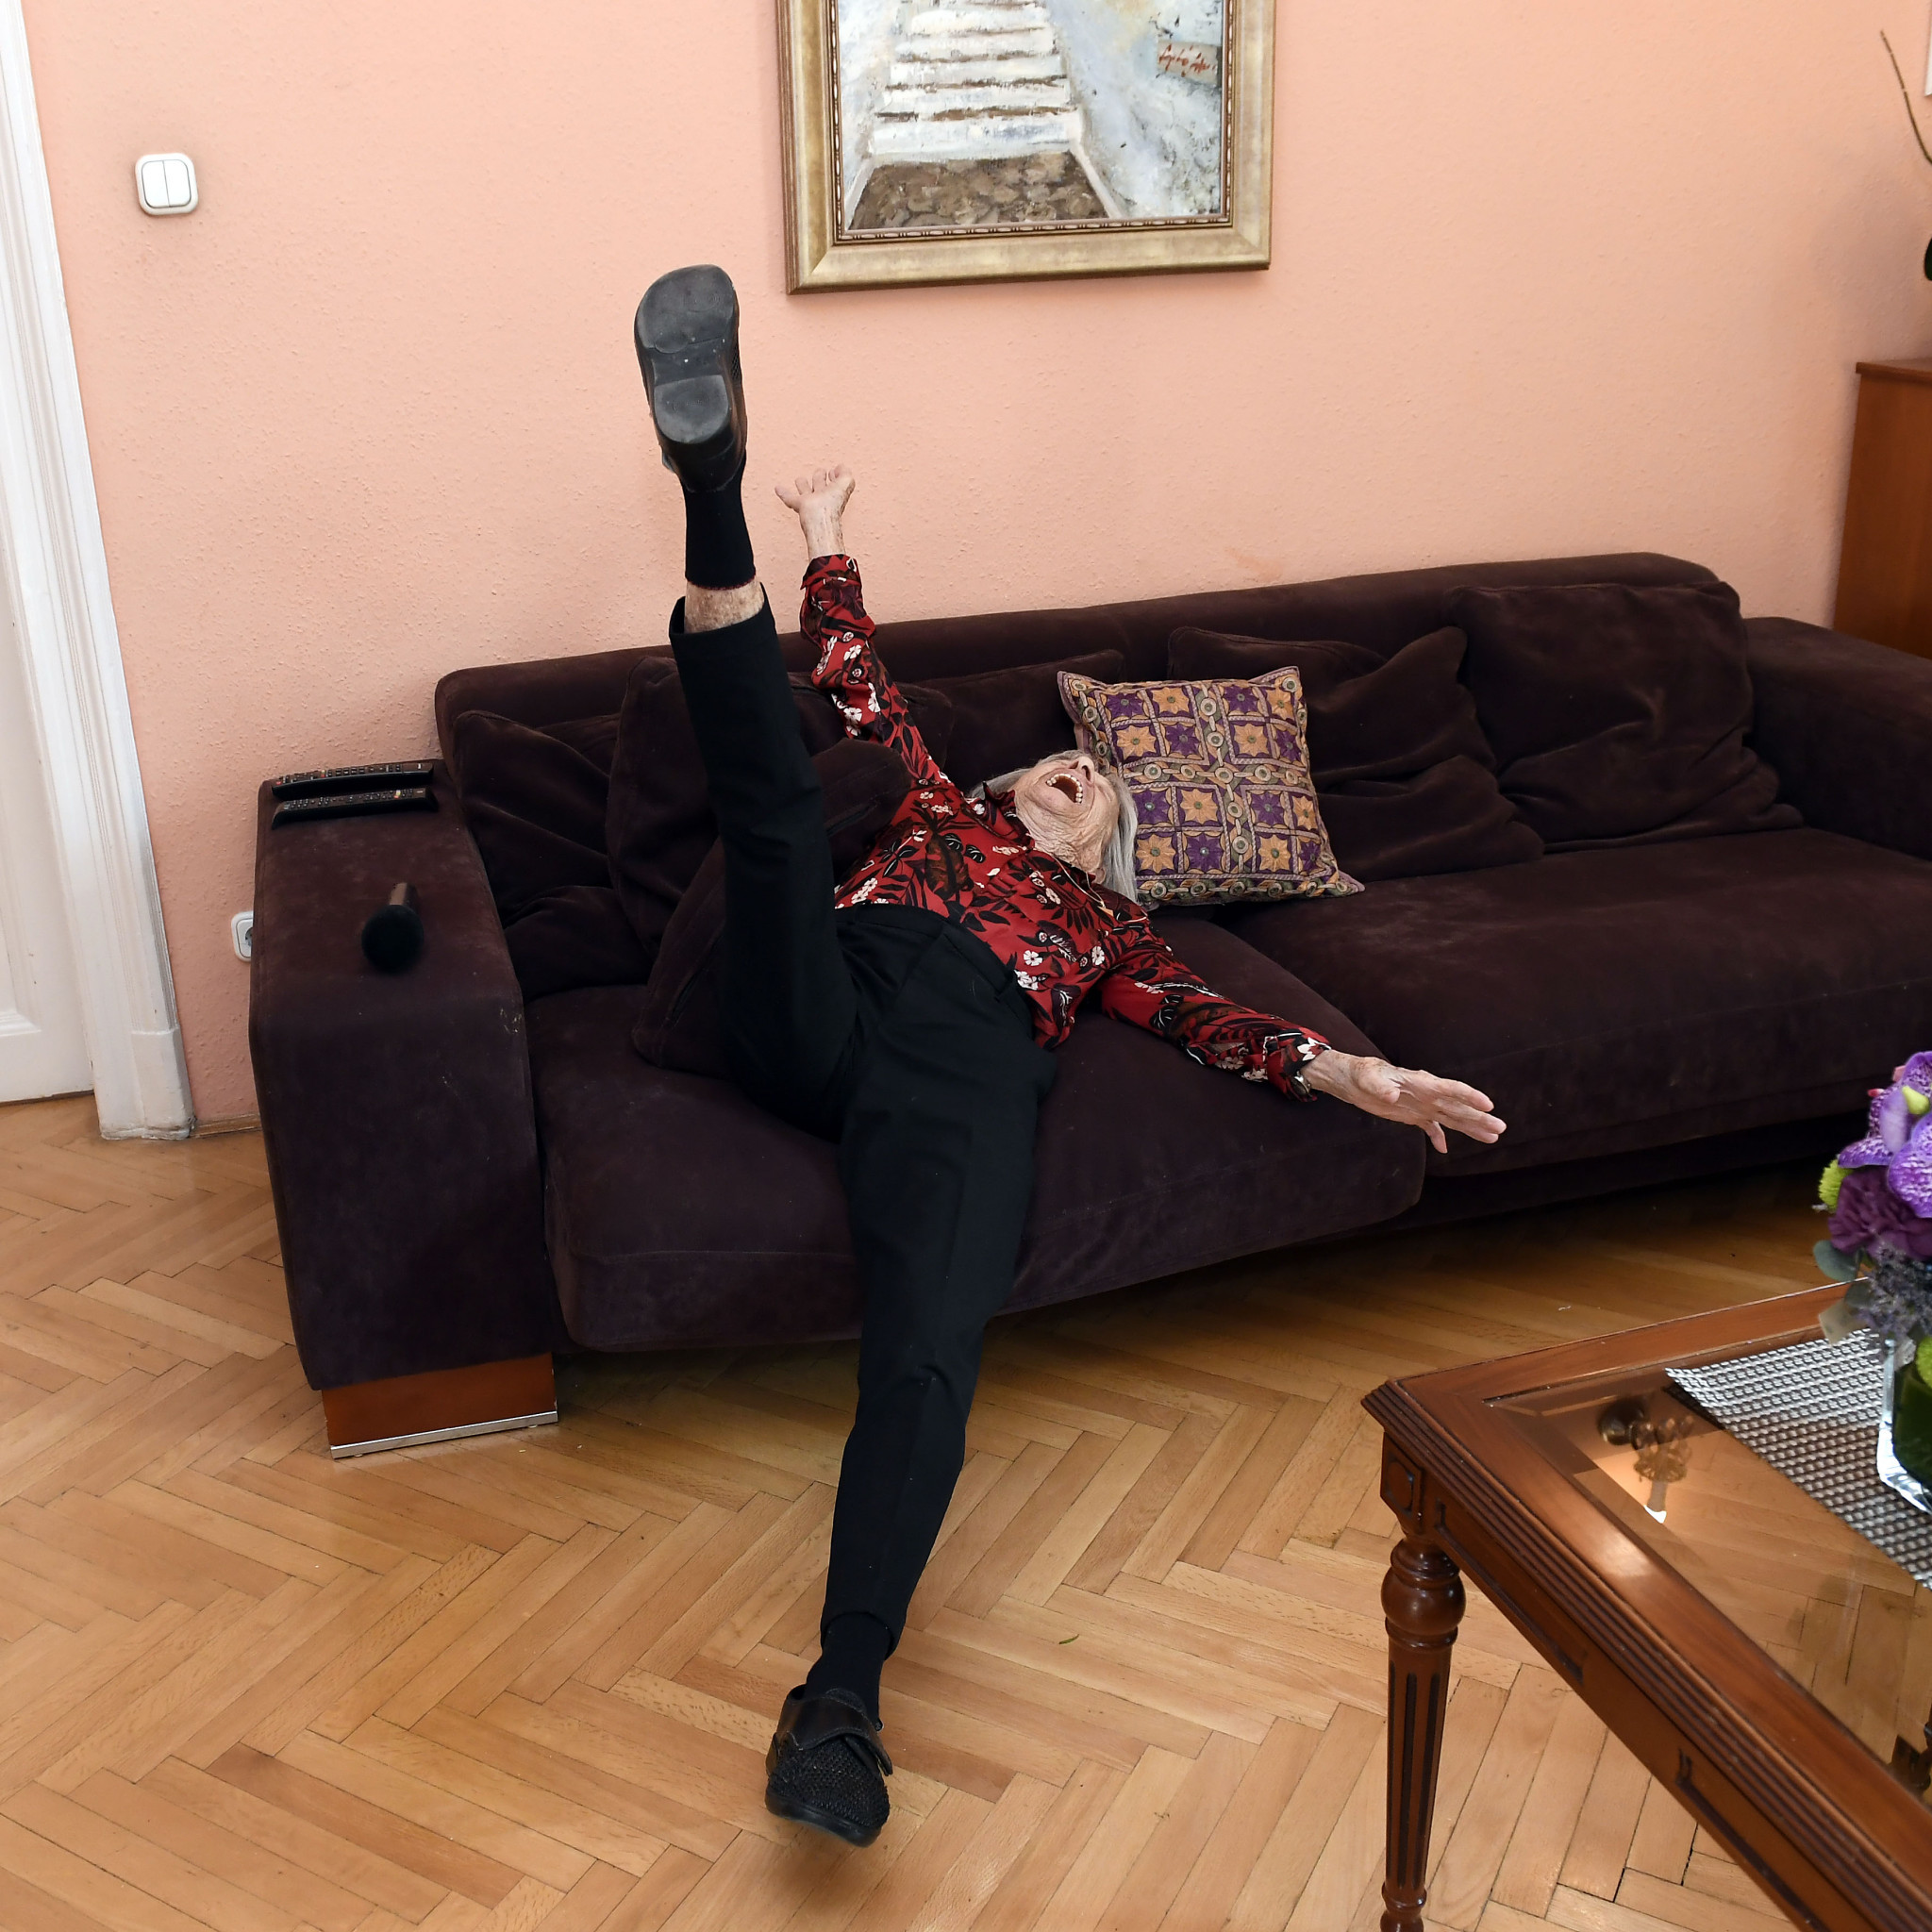 Ágnes Keleti shows that she still has the moves as she turns 100 ©Hungarian Olympic Committee